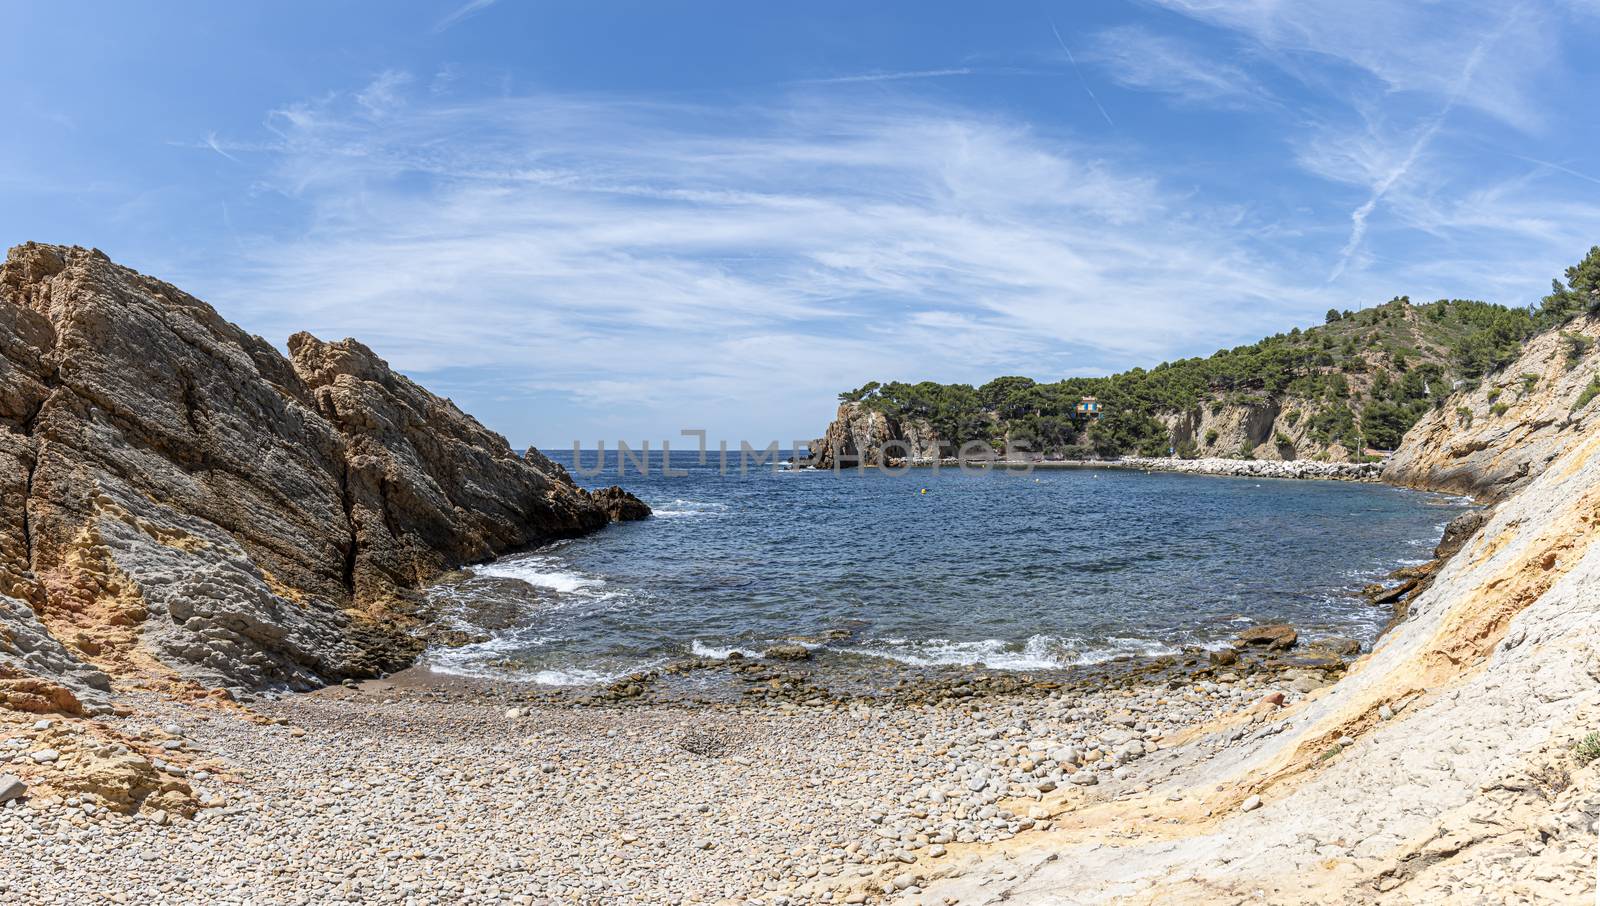 pebble beach of Calanques of Figuieres, France by GABIS